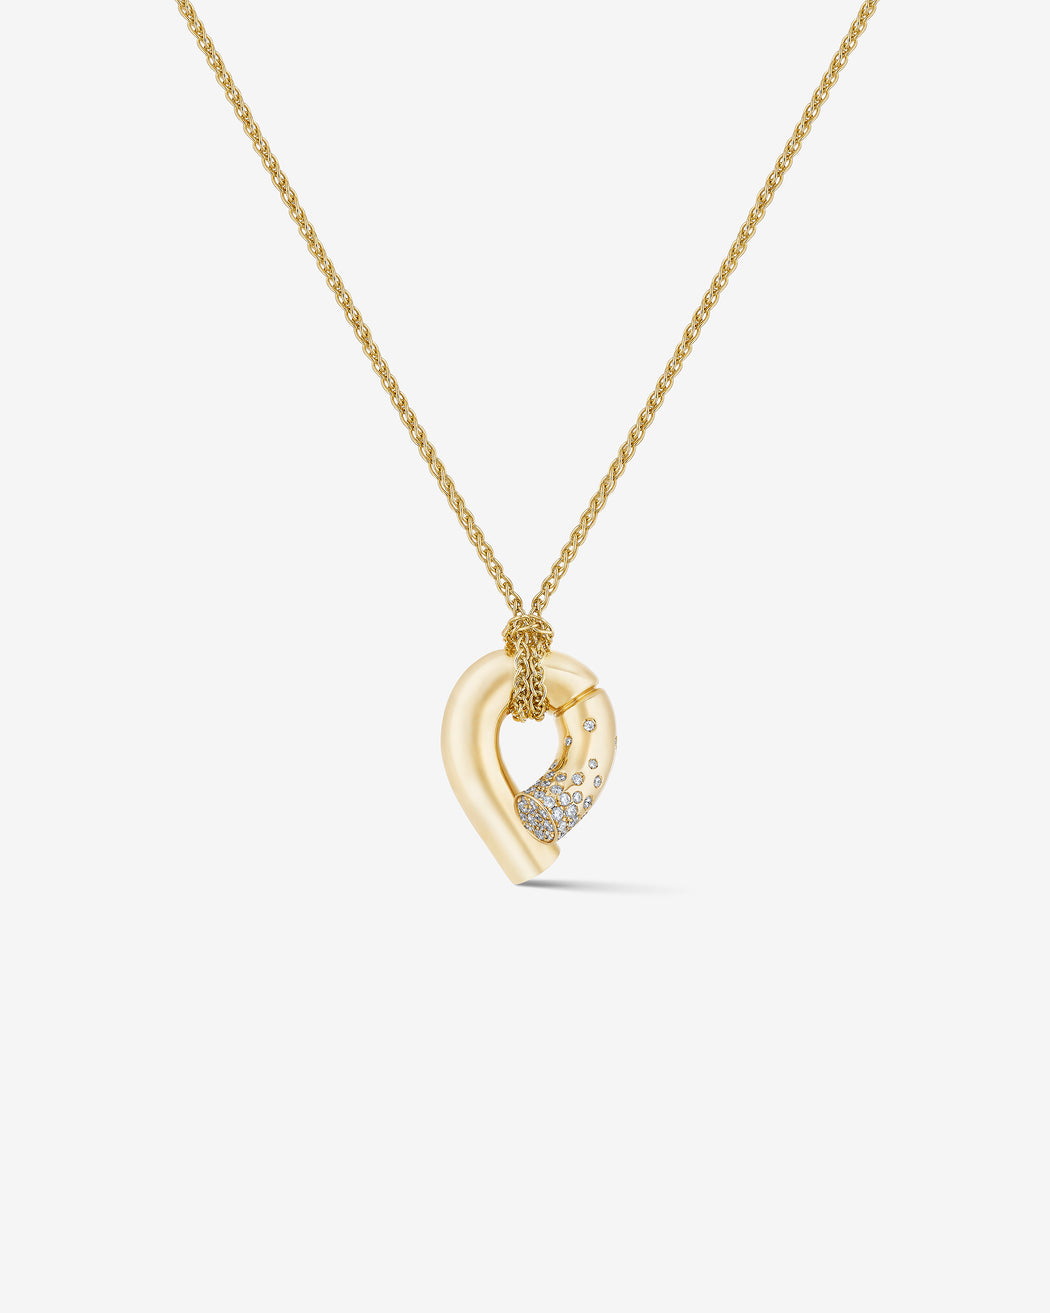 Oera pendant 18k Fairmined yellow gold and diamonds, Tabayer ethical fine jewelry